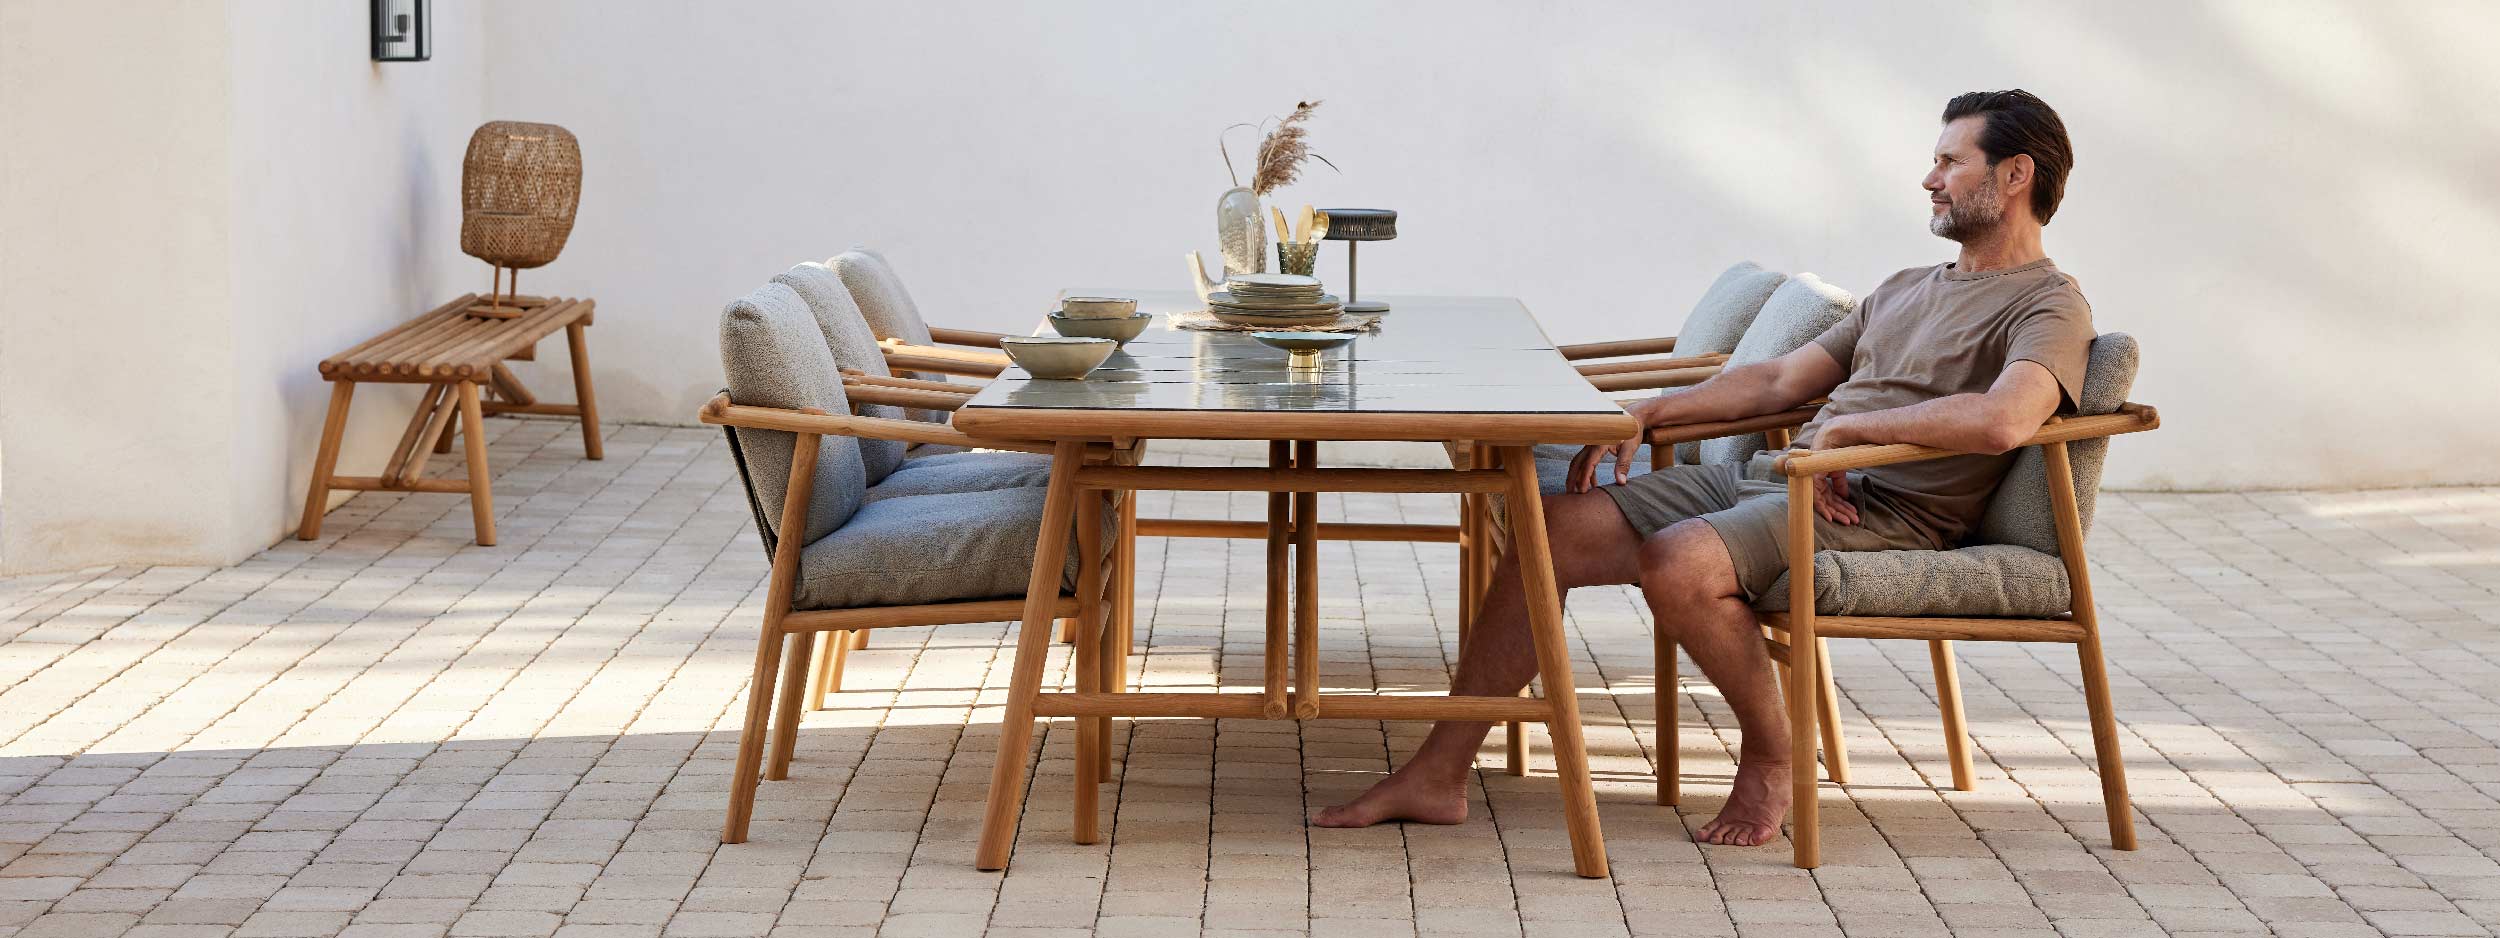 Image of man sat contemplating in Sticks teak garden chair next to Sticks dining table, with Sticks teak bench seat against a wall in the background